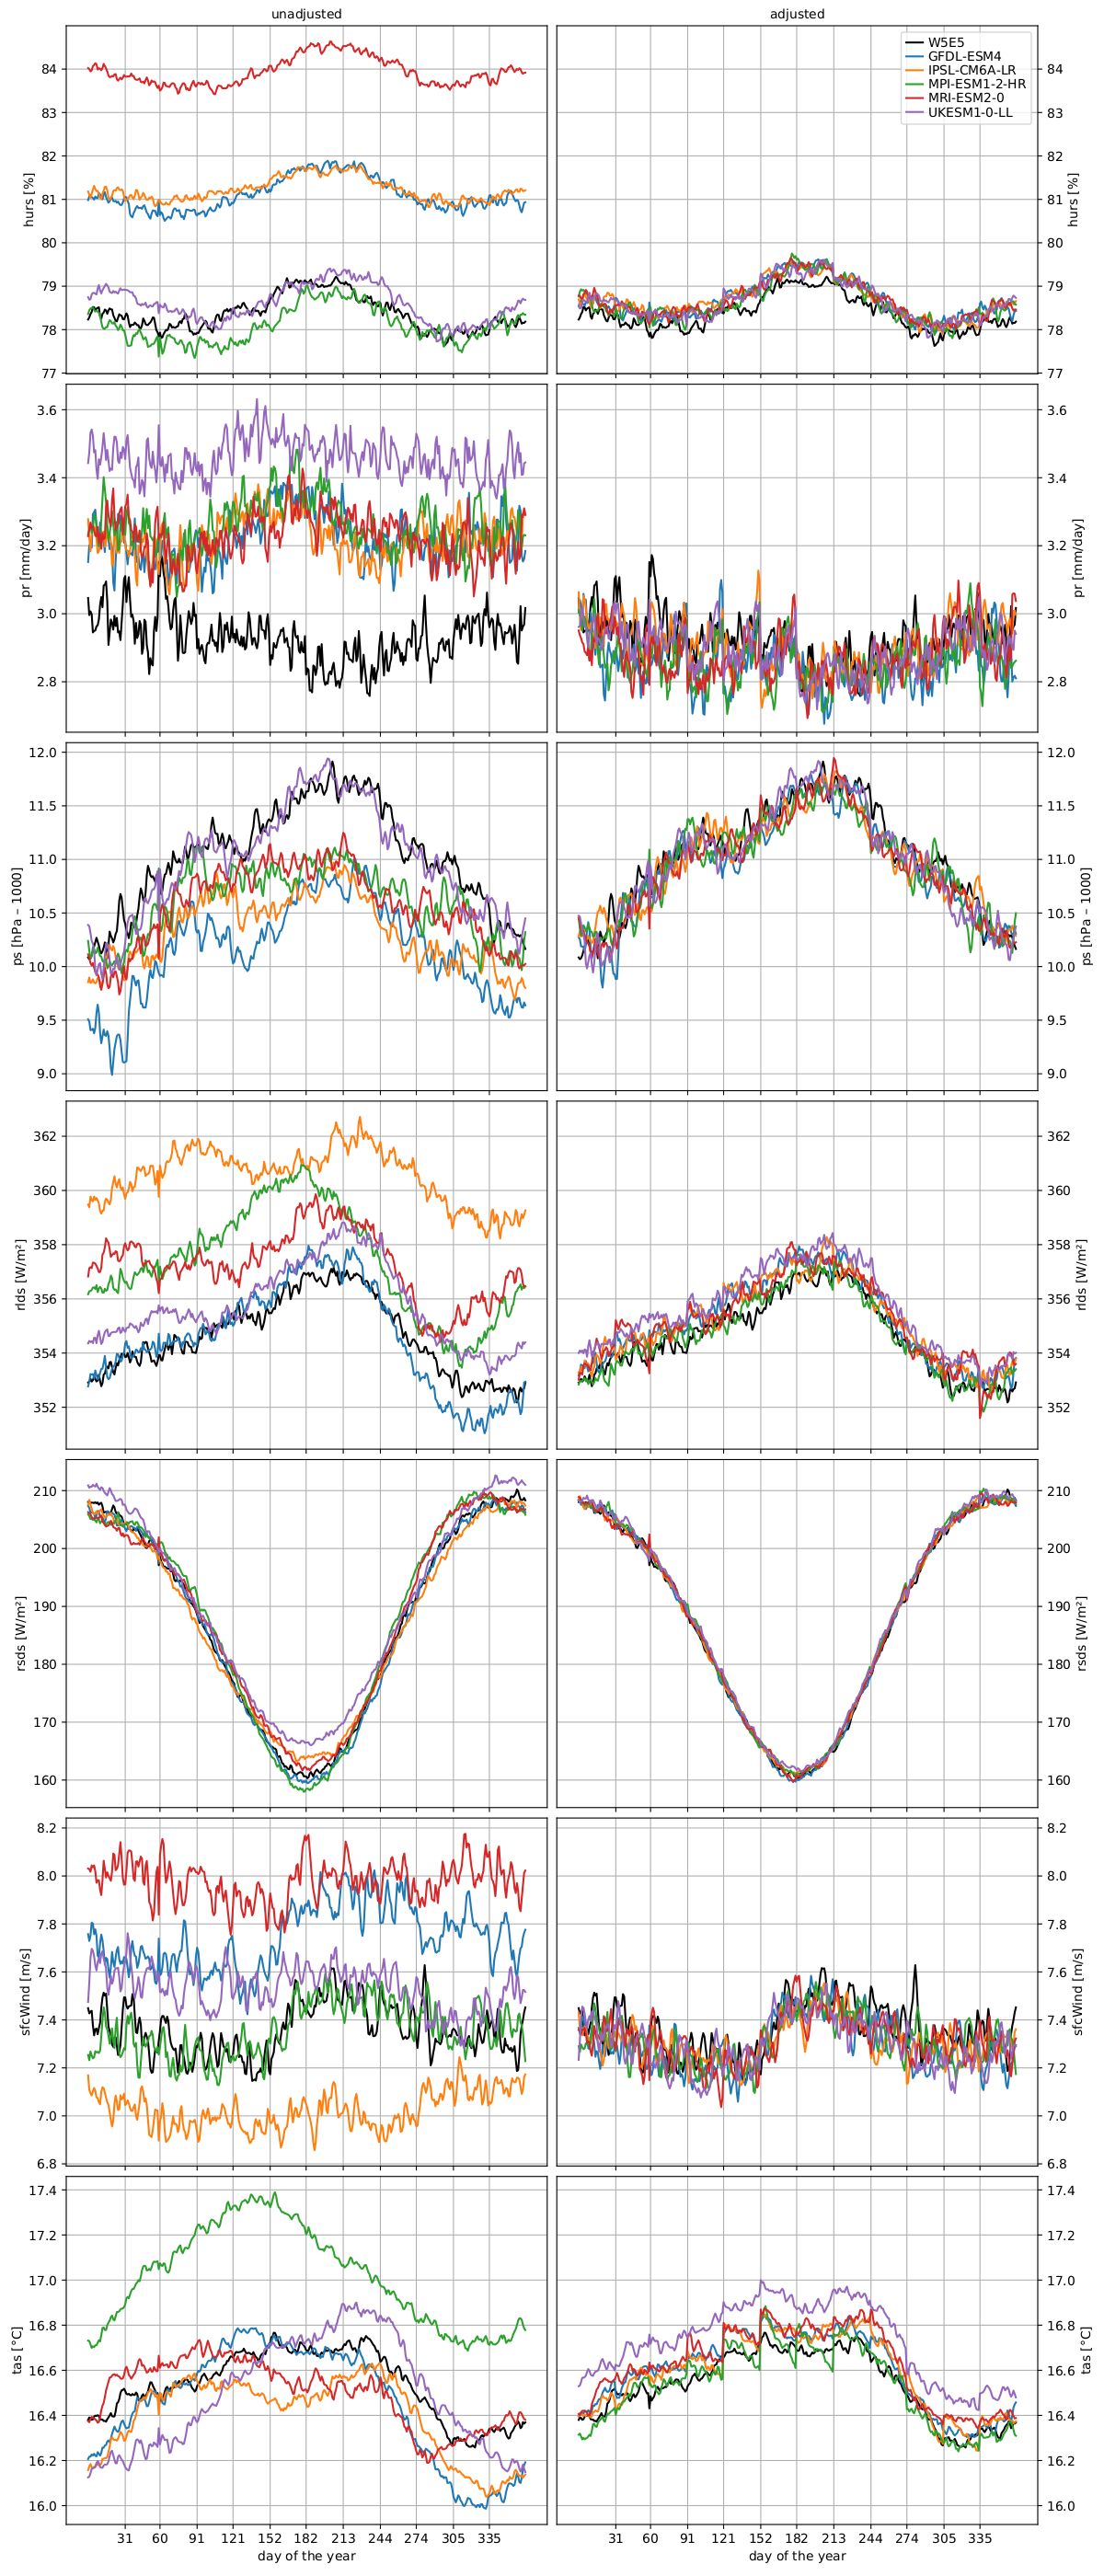 Discontinuities found in bias-adjusted climate input data (ocean)